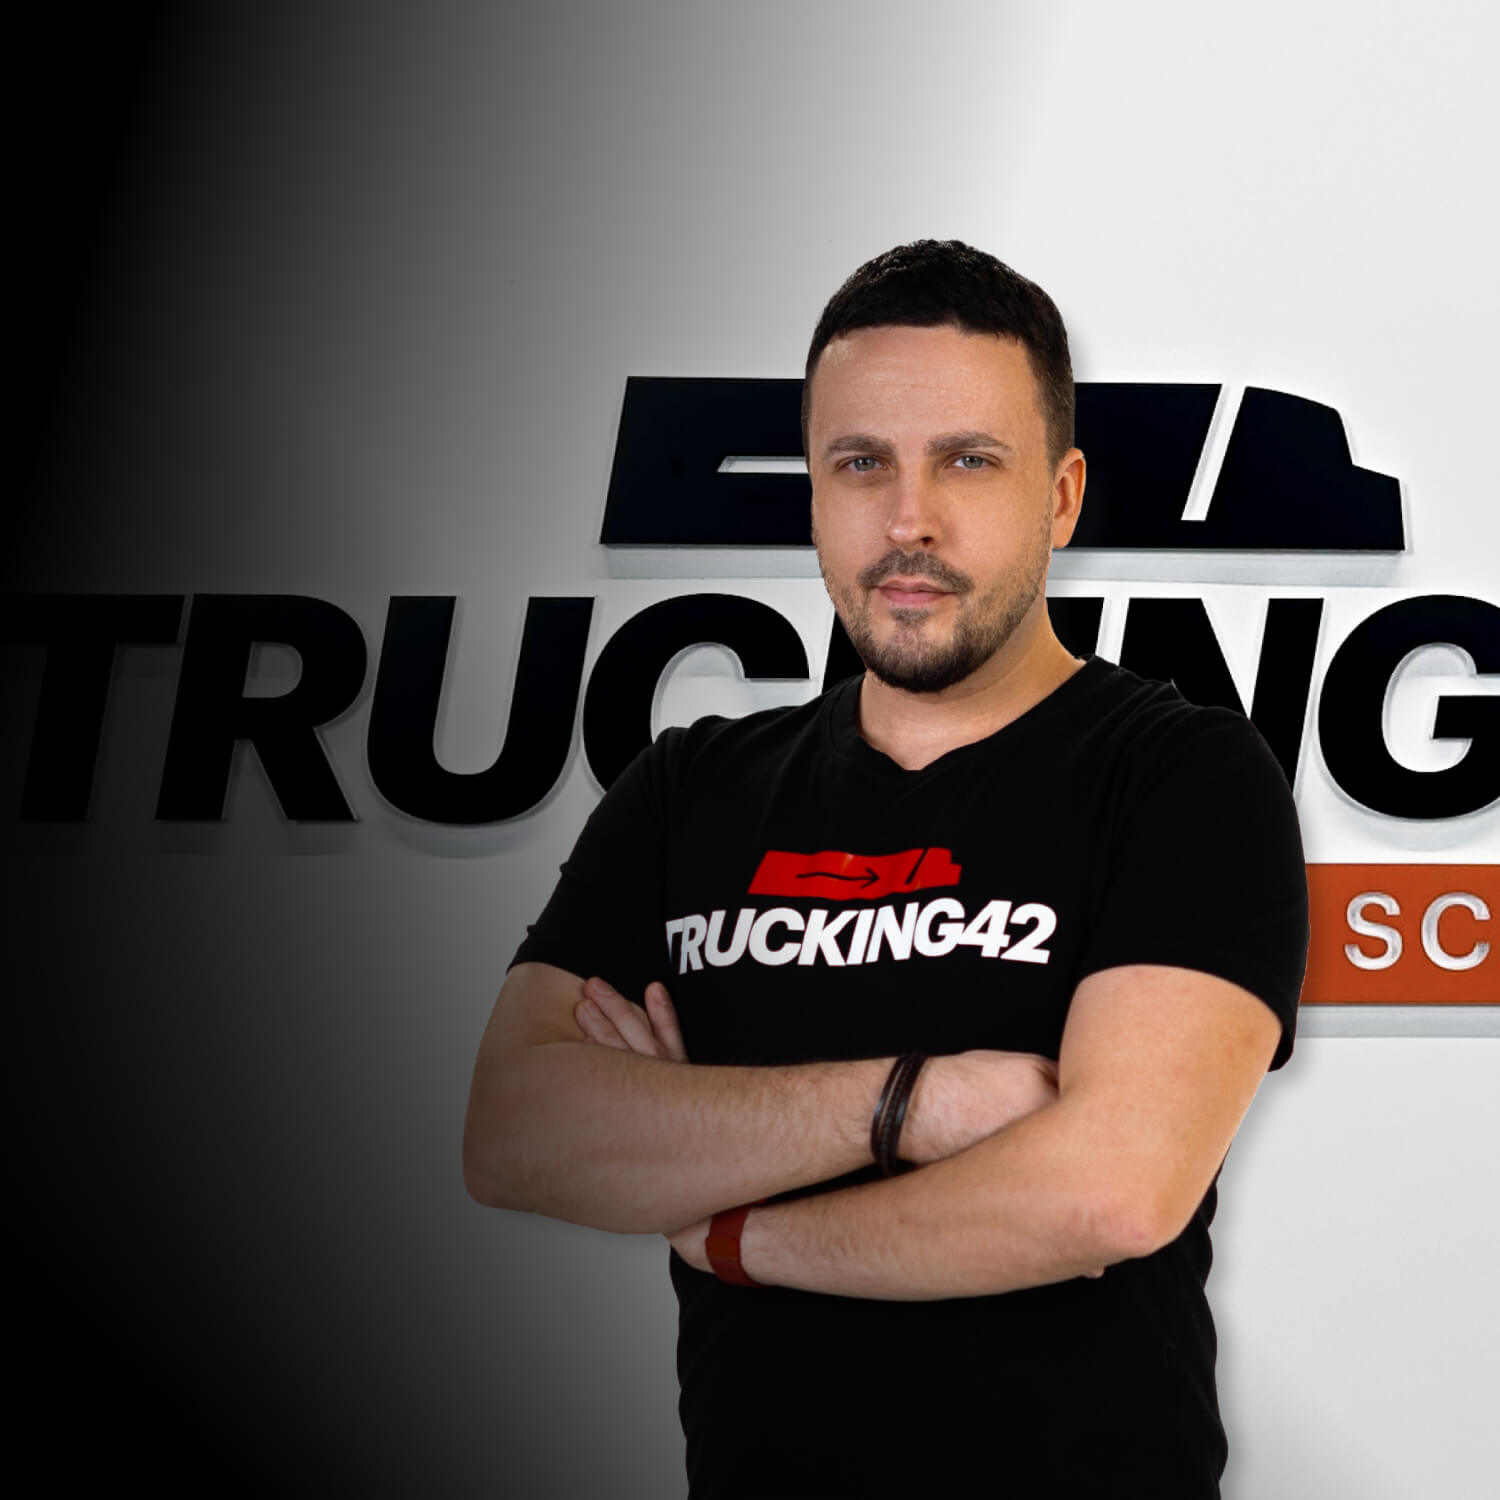 How to Start a Successful Trucking Business